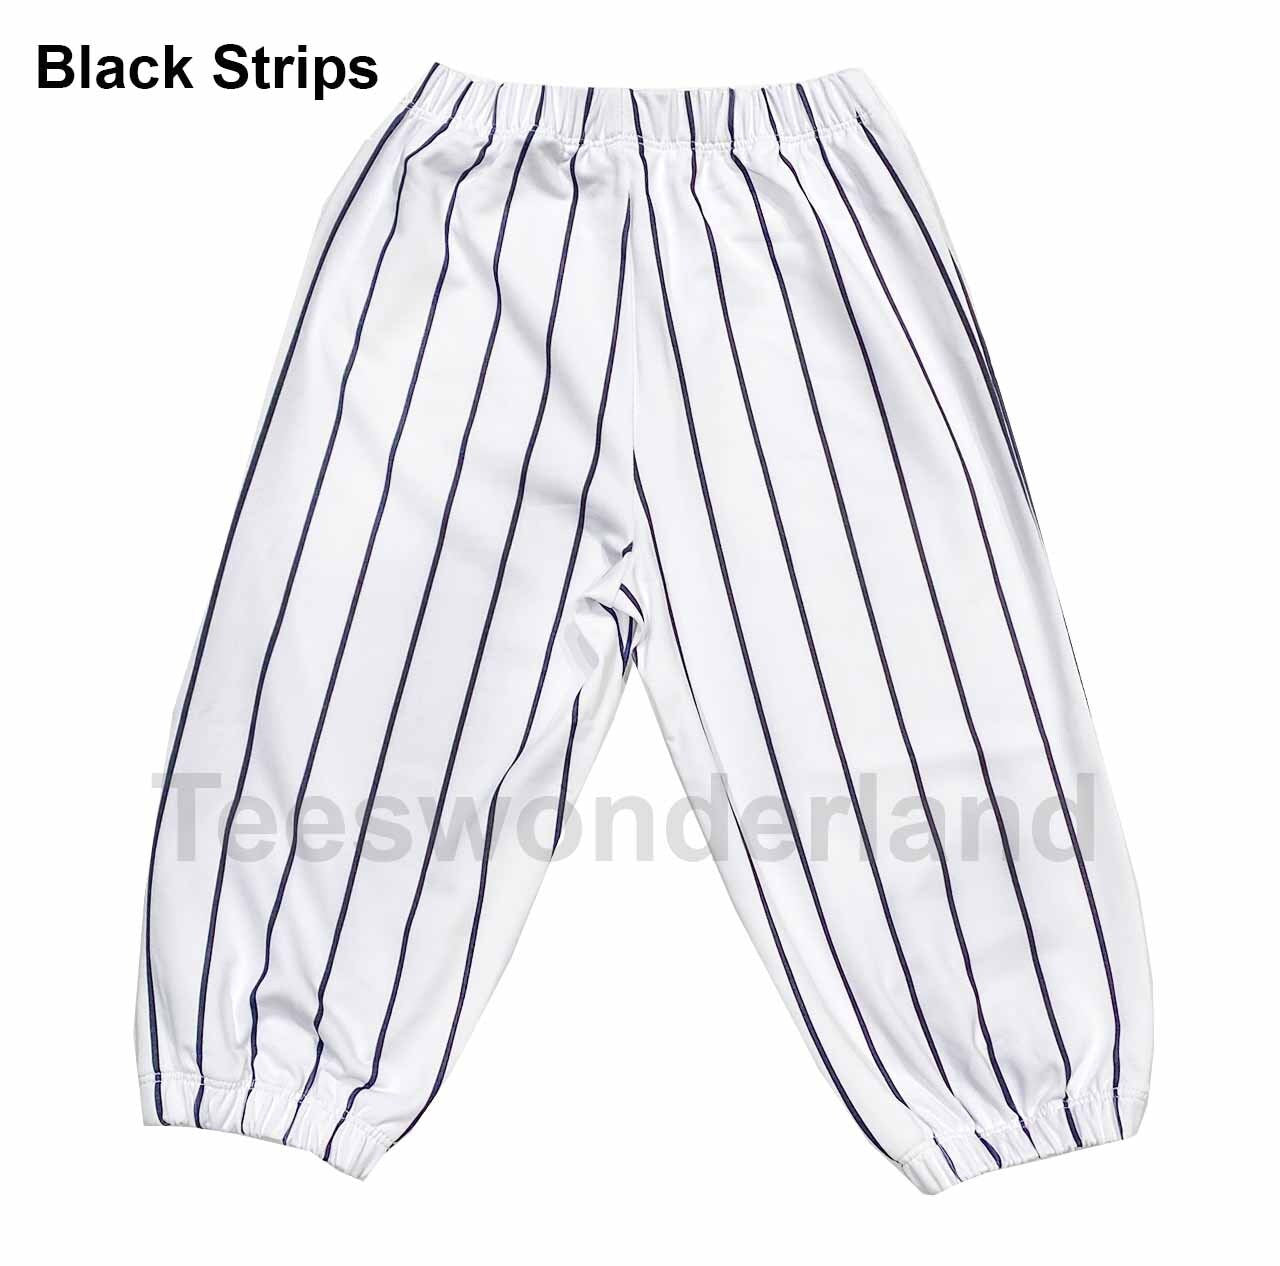 Toddler Baseball Pants, Rookie Of The Year Pants, 1st Birthday Baseball Pants, Baseball Pants, Baseball Pinstriped Pants, Baseball Birthday